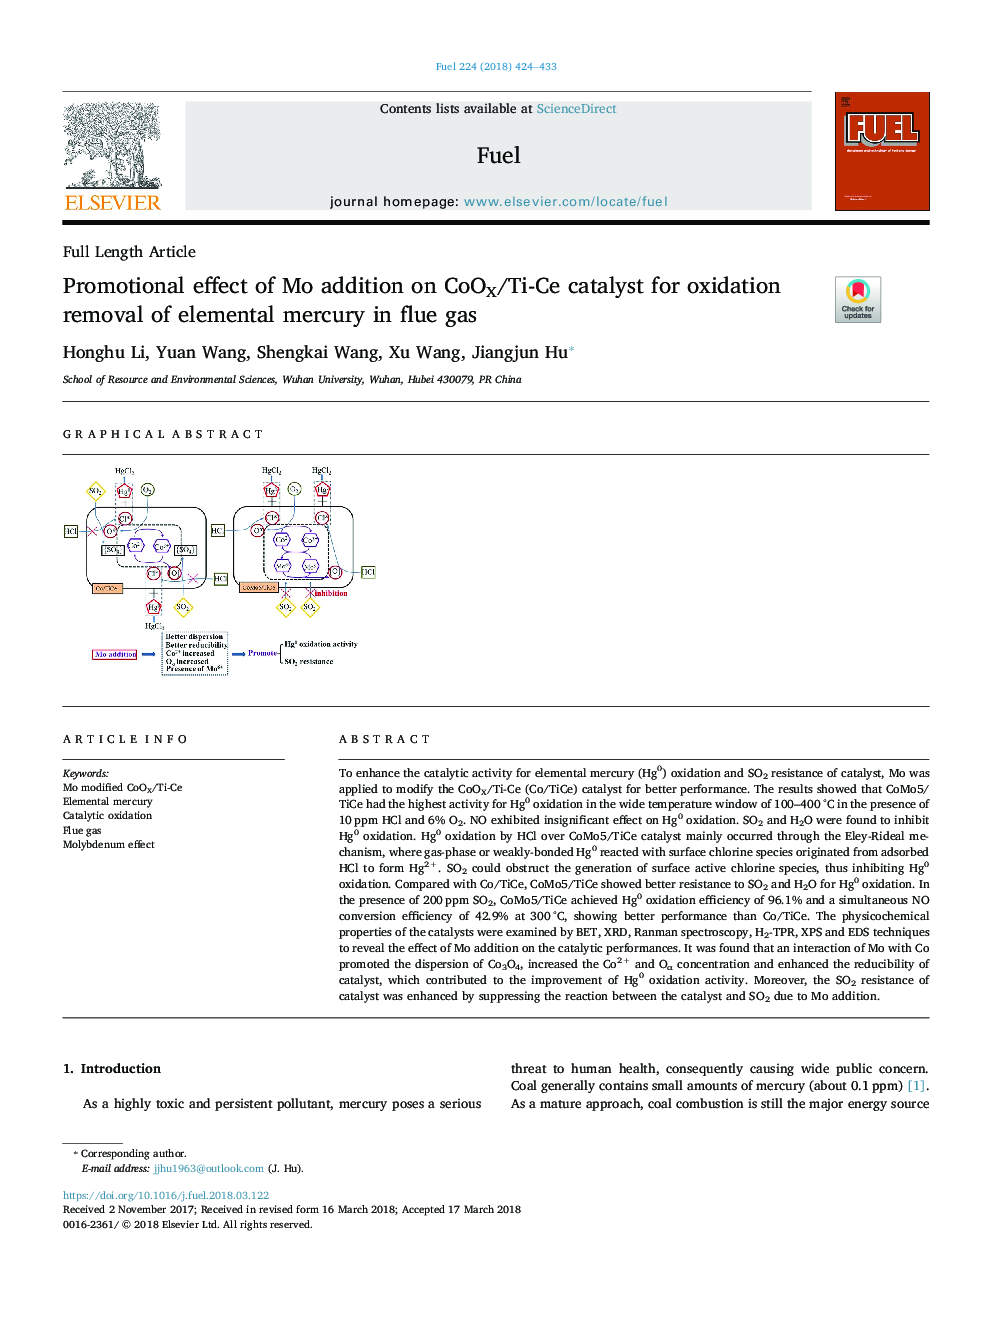 Promotional effect of Mo addition on CoOX/Ti-Ce catalyst for oxidation removal of elemental mercury in flue gas